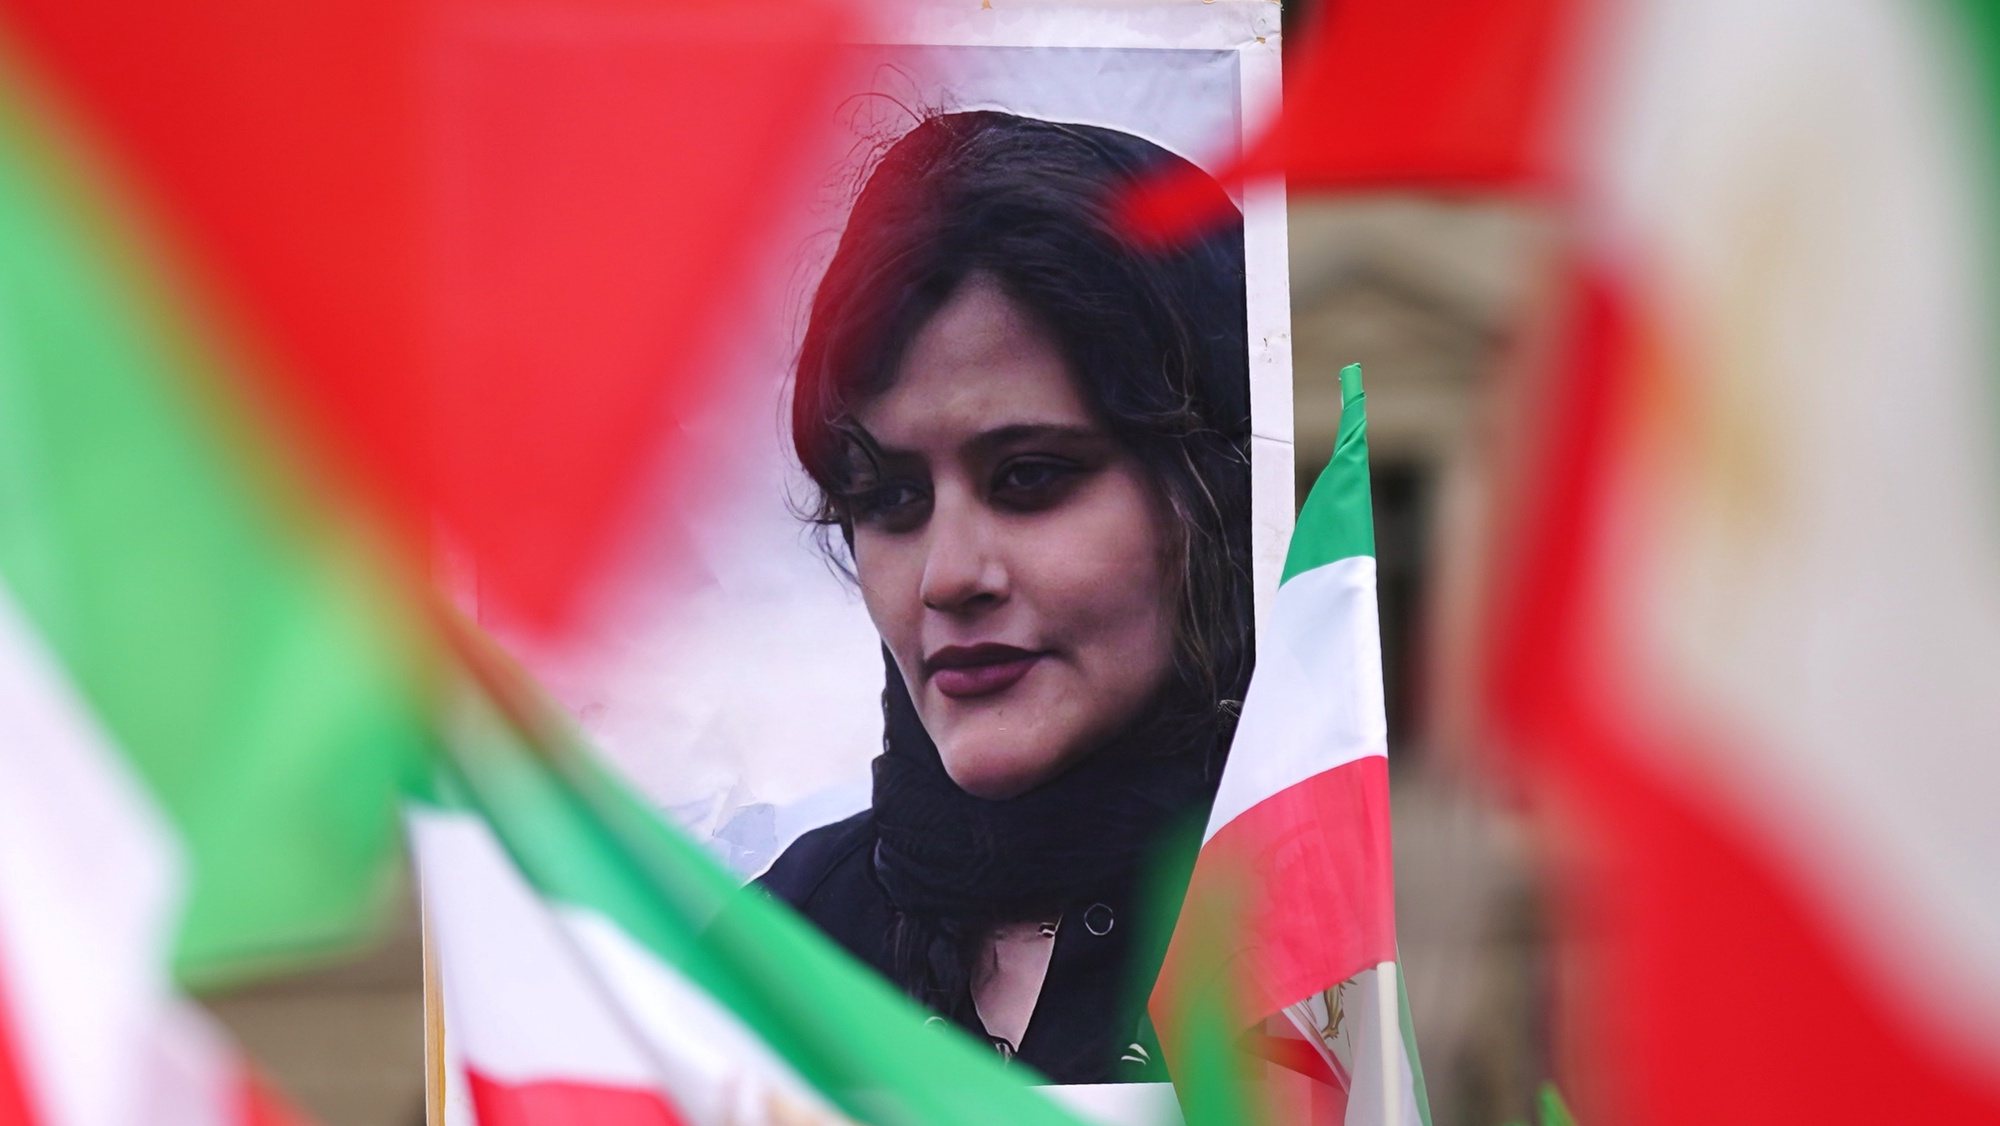 epa10217479 A portrait of Mahsa Amini stands between Iranian national flags during a &#039;Solidarity with the civil uprising in Iran&#039; rally at Bebel Platz square in Berlin, Germany, 01 October 2022. Protests have erupted in Iran and across the world after the death of Mahsa Amini who died in the custody of Iran&#039;s morality police.  EPA/CLEMENS BILAN